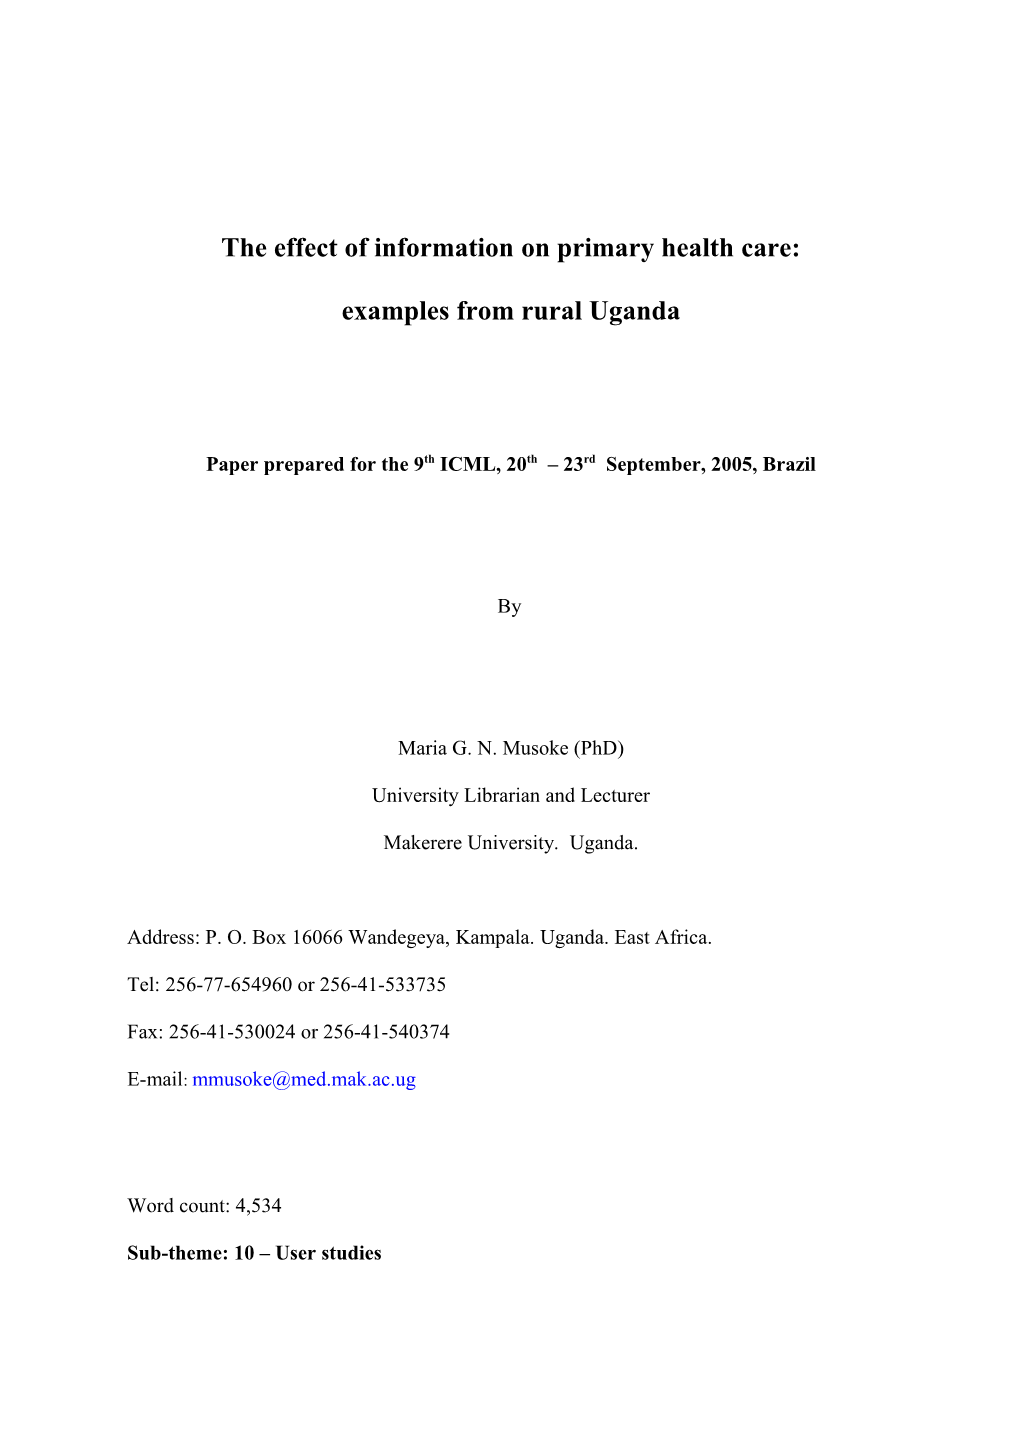 The Effect of Information on Primary Health Care